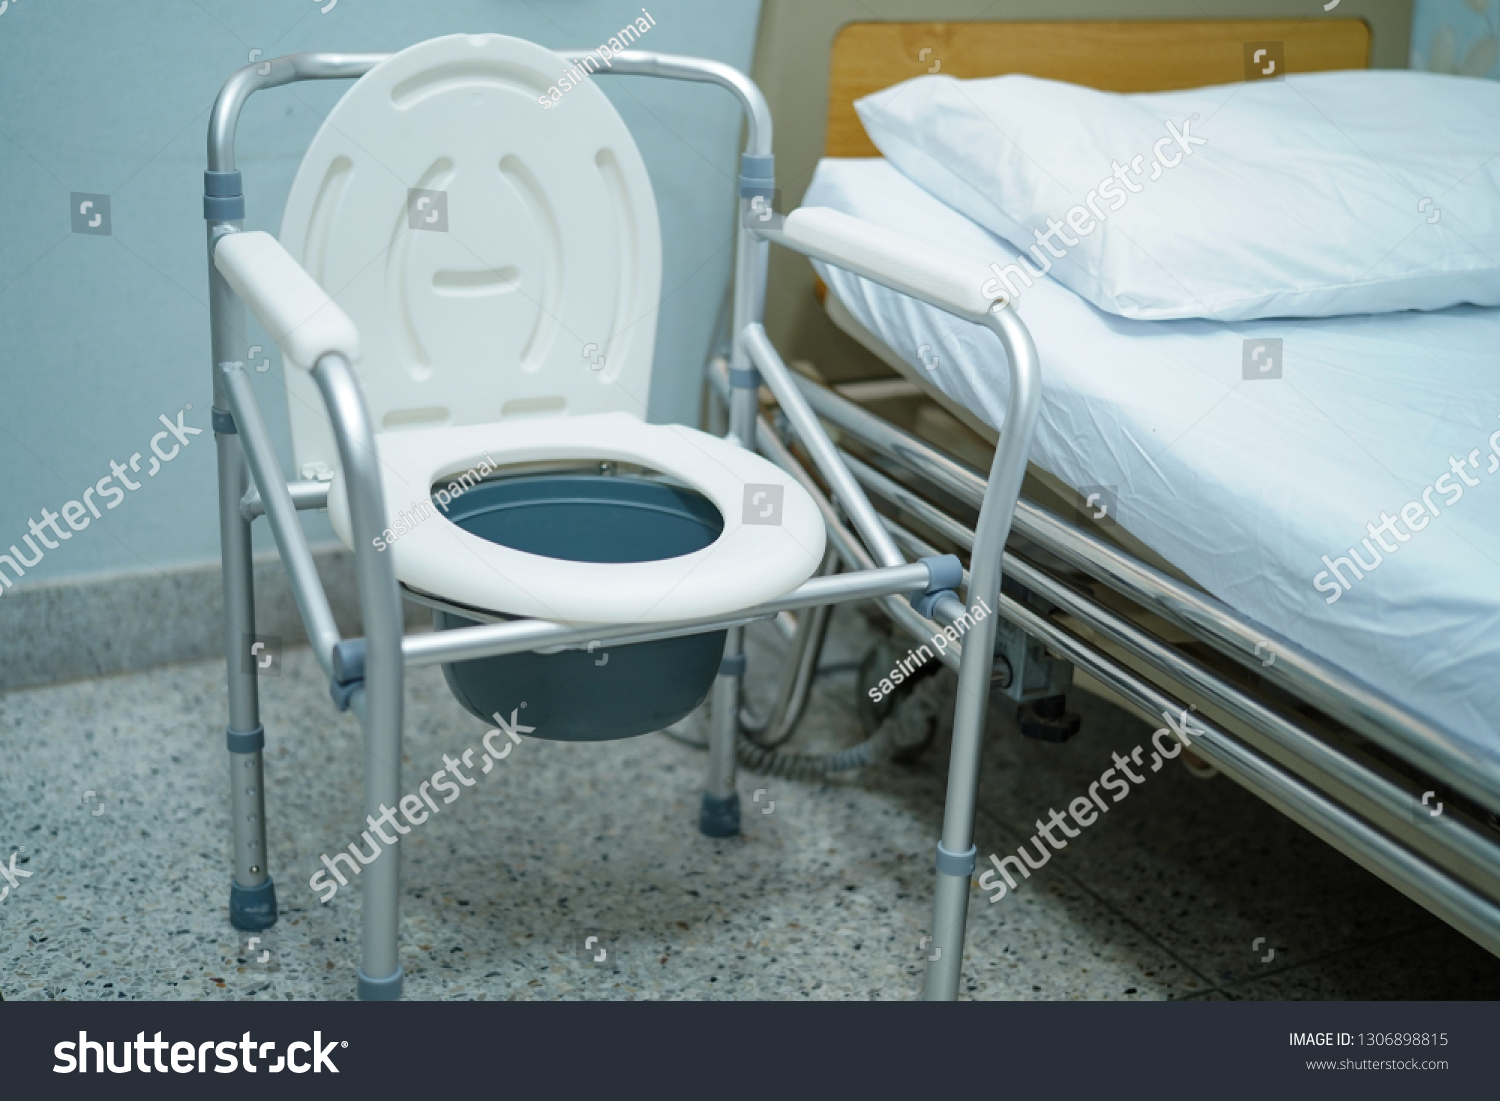 Commode Chair Mobile Toilet Can Moving Stock Image Download Now